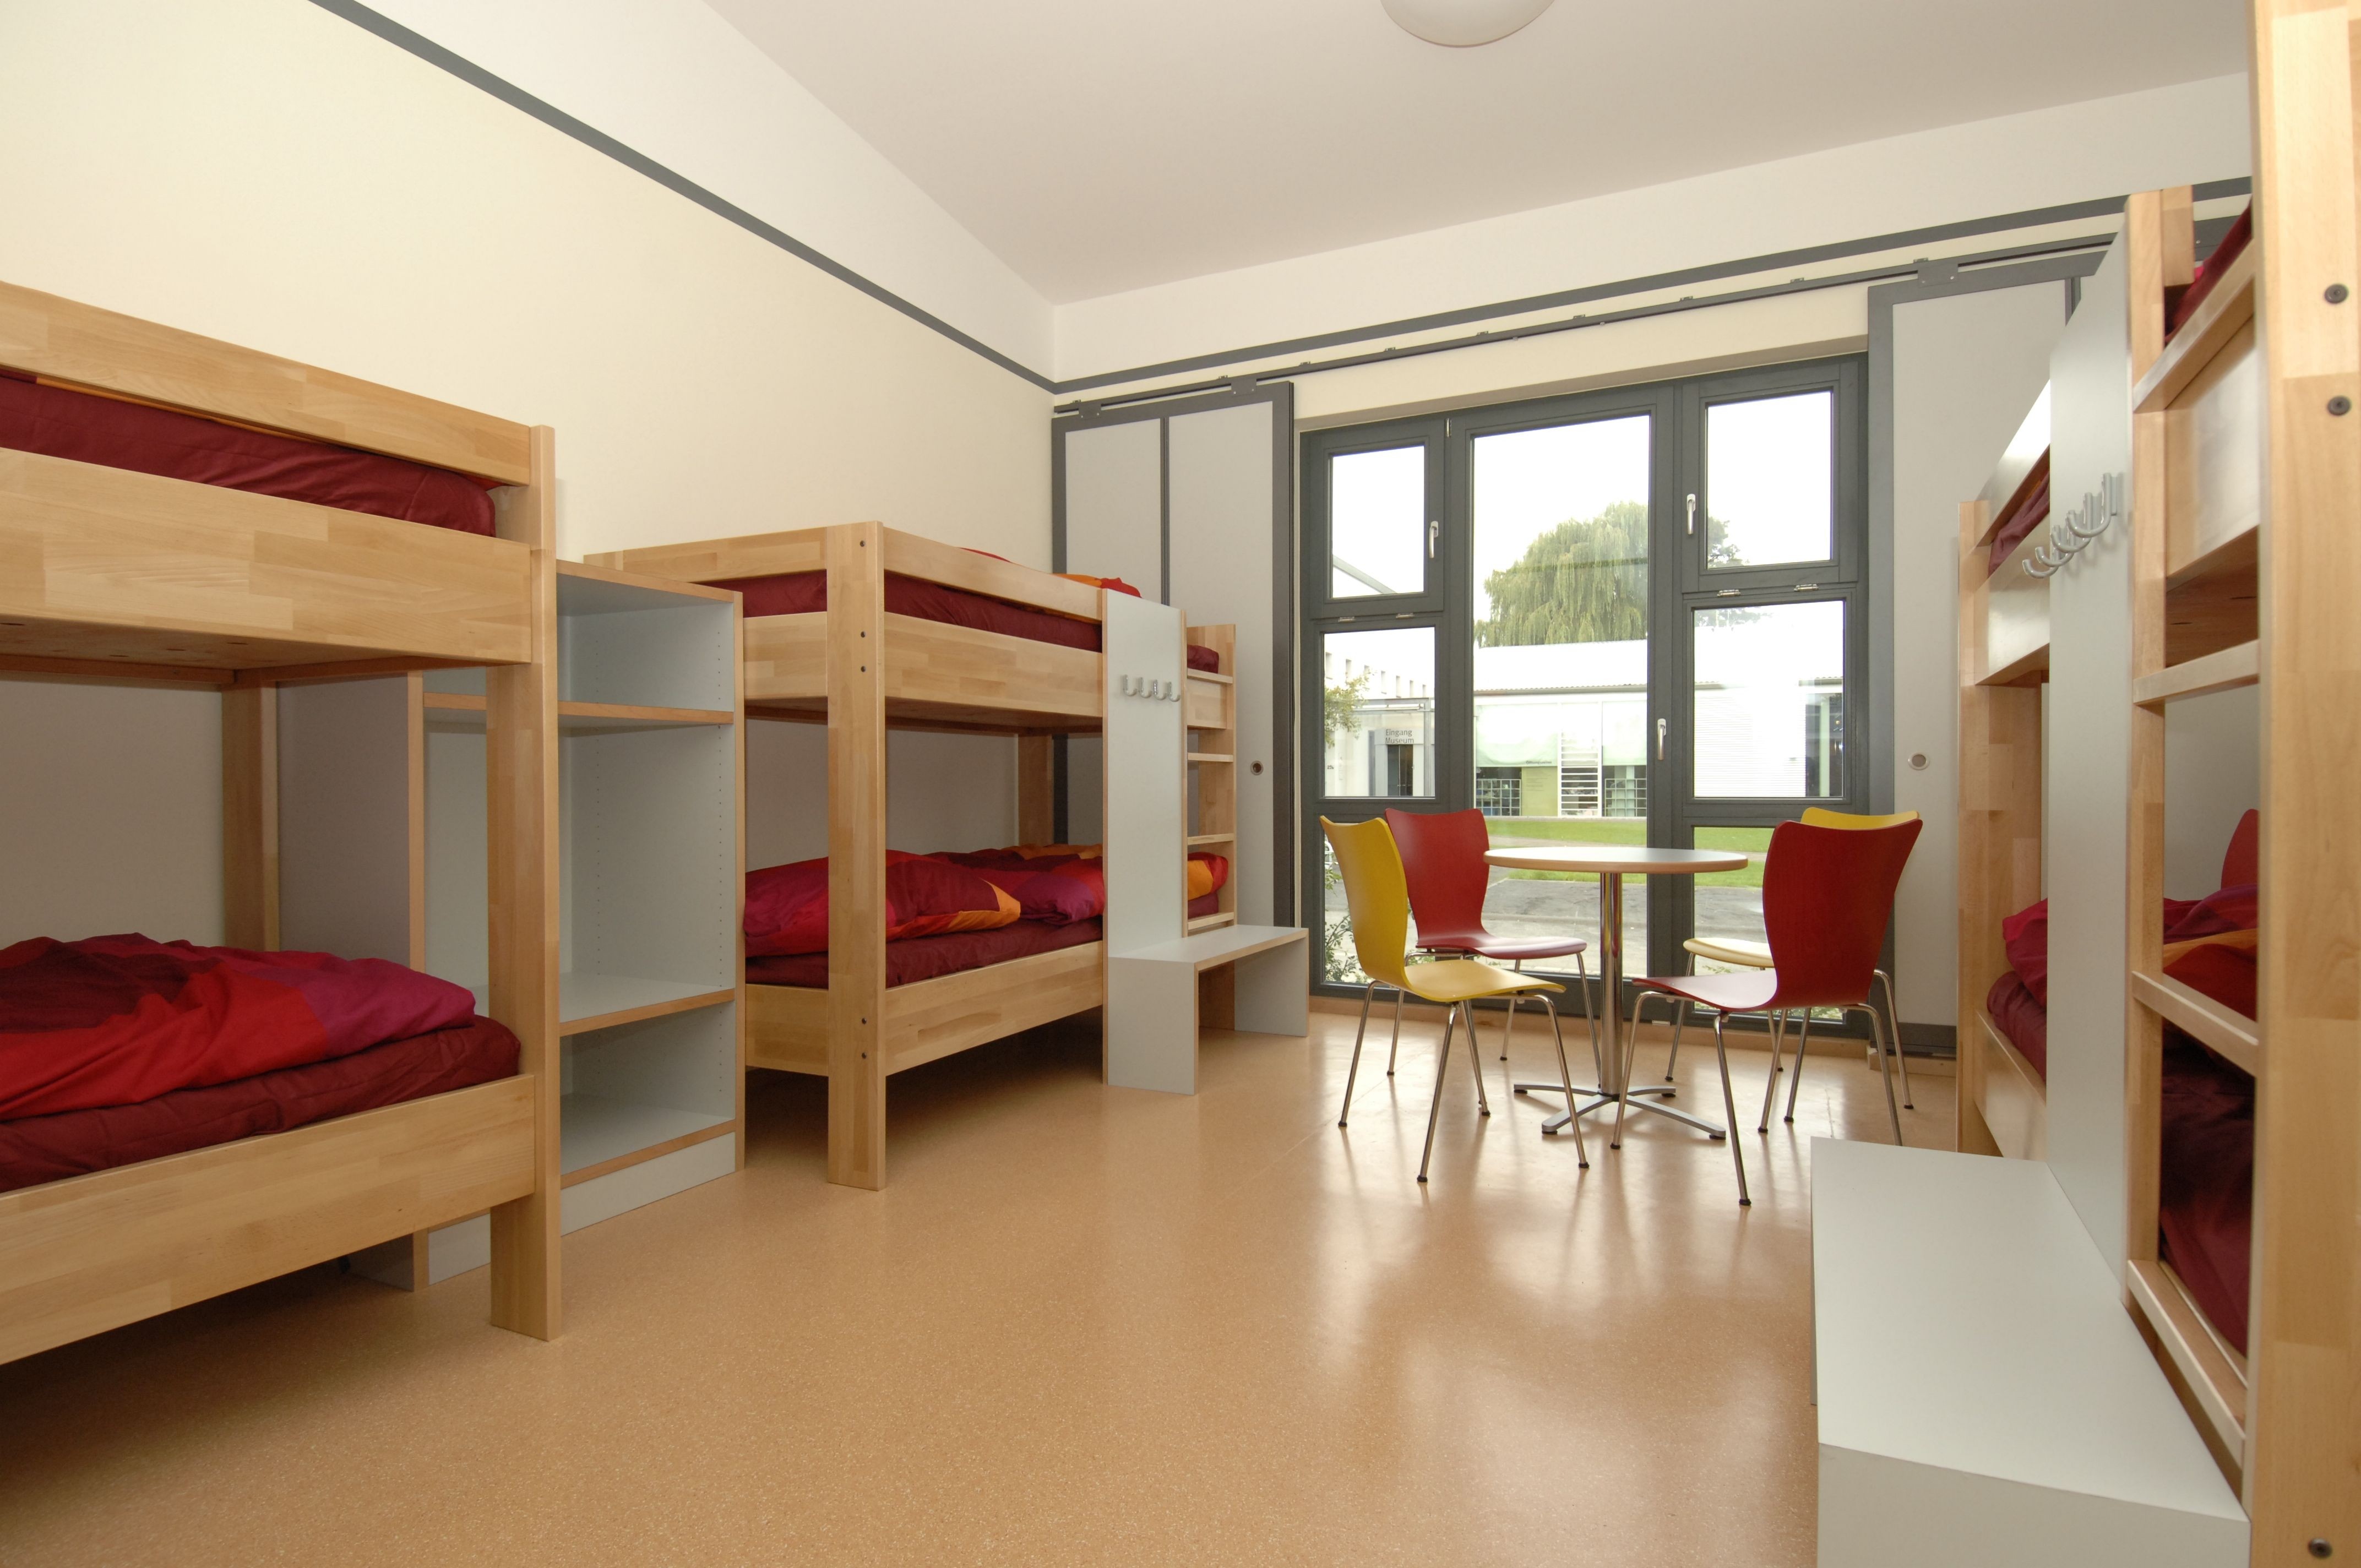 The sleeping quarters, here a six-bed room, are functionally and harmoniously furnished.